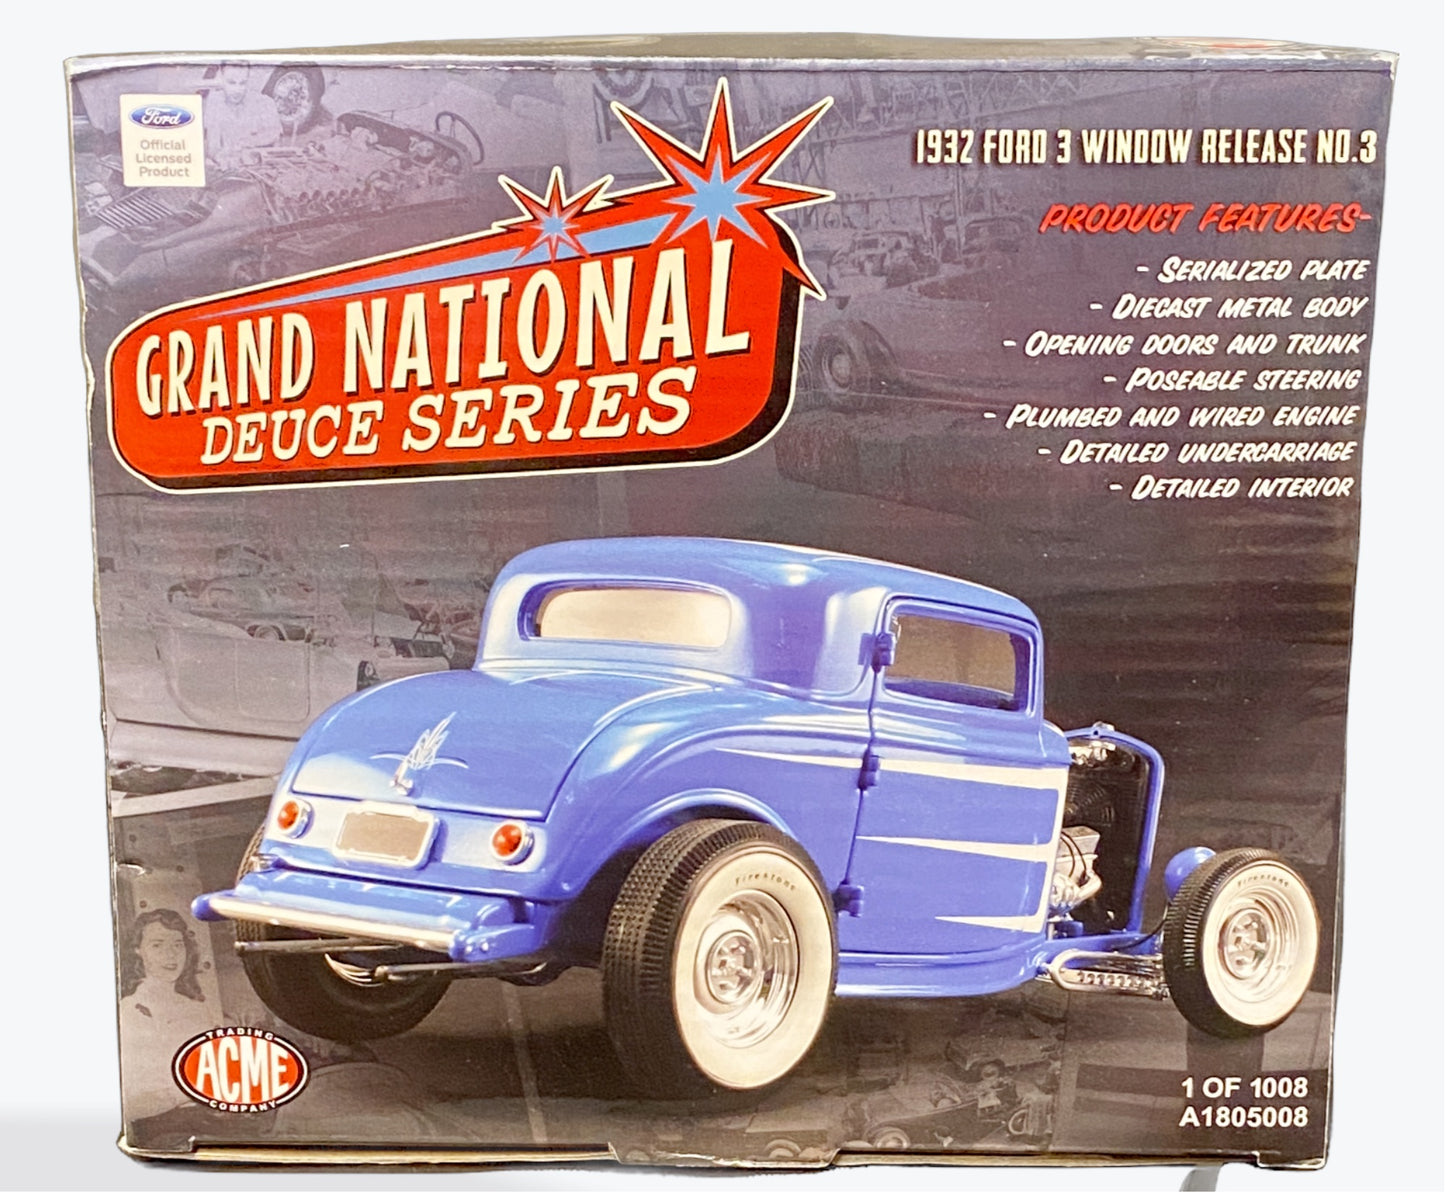 1/18 Scale 1932 Ford 3 Window Coupe